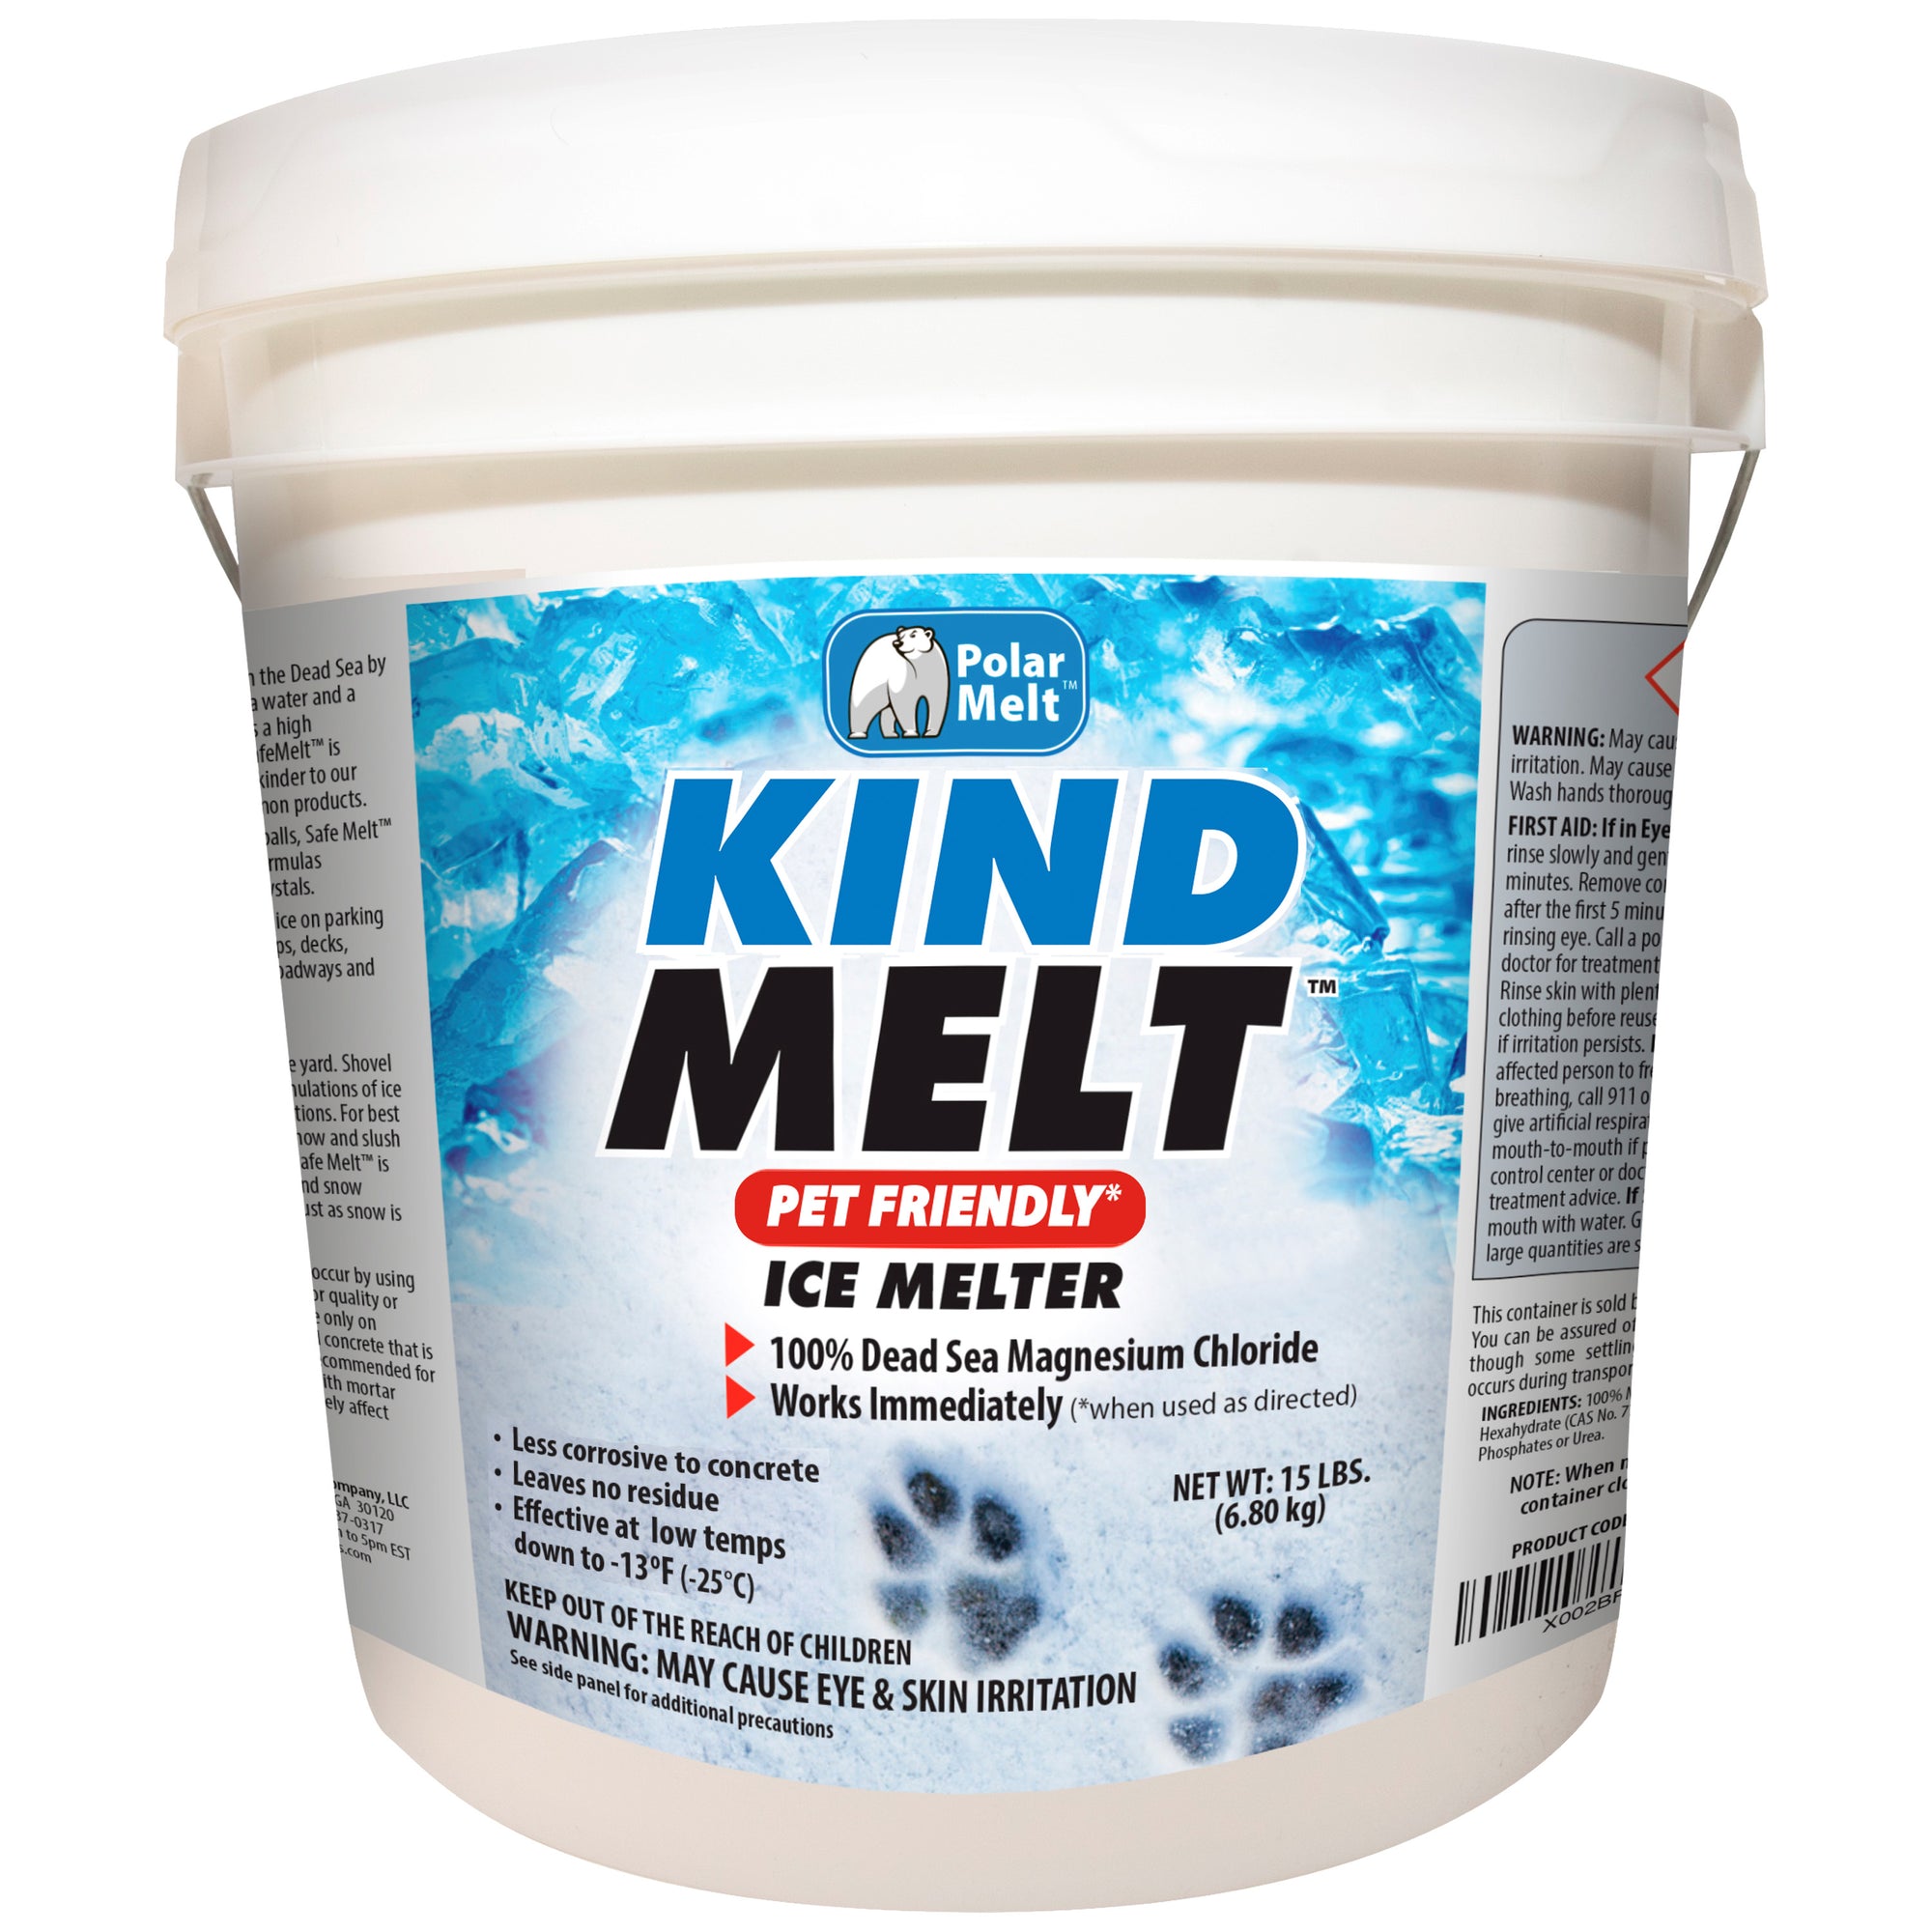 Five Different Types Of Ice Melt - Safe Paw Ice Melt